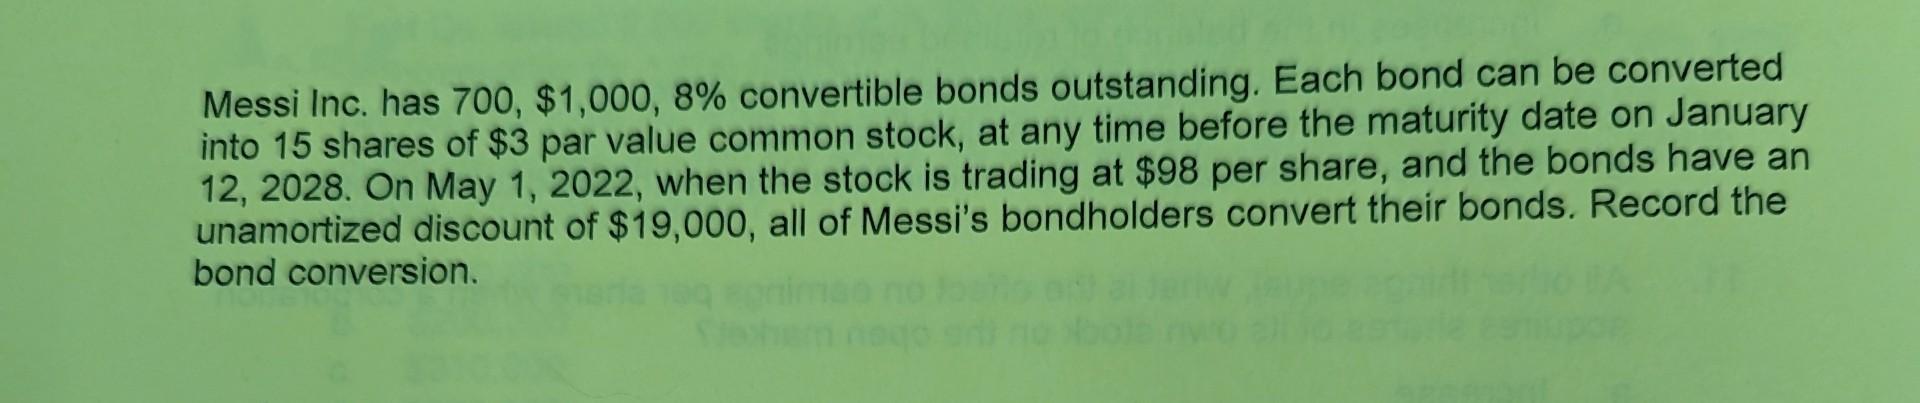 Messi Inc. has 700, $1,000, 8% convertible bonds outstanding. Each bond can be converted into 15 shares of $3